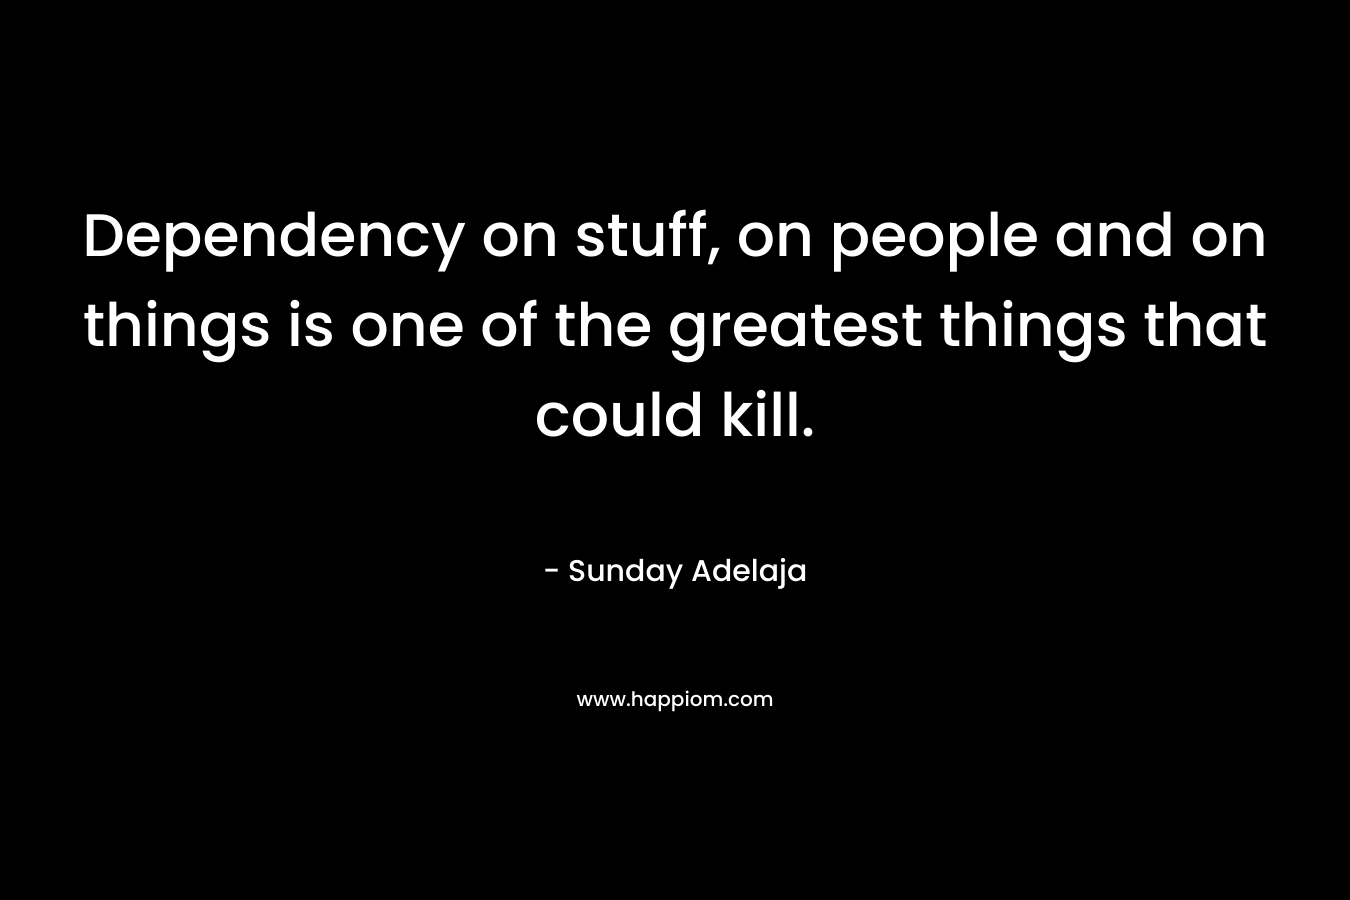 Dependency on stuff, on people and on things is one of the greatest things that could kill. – Sunday Adelaja